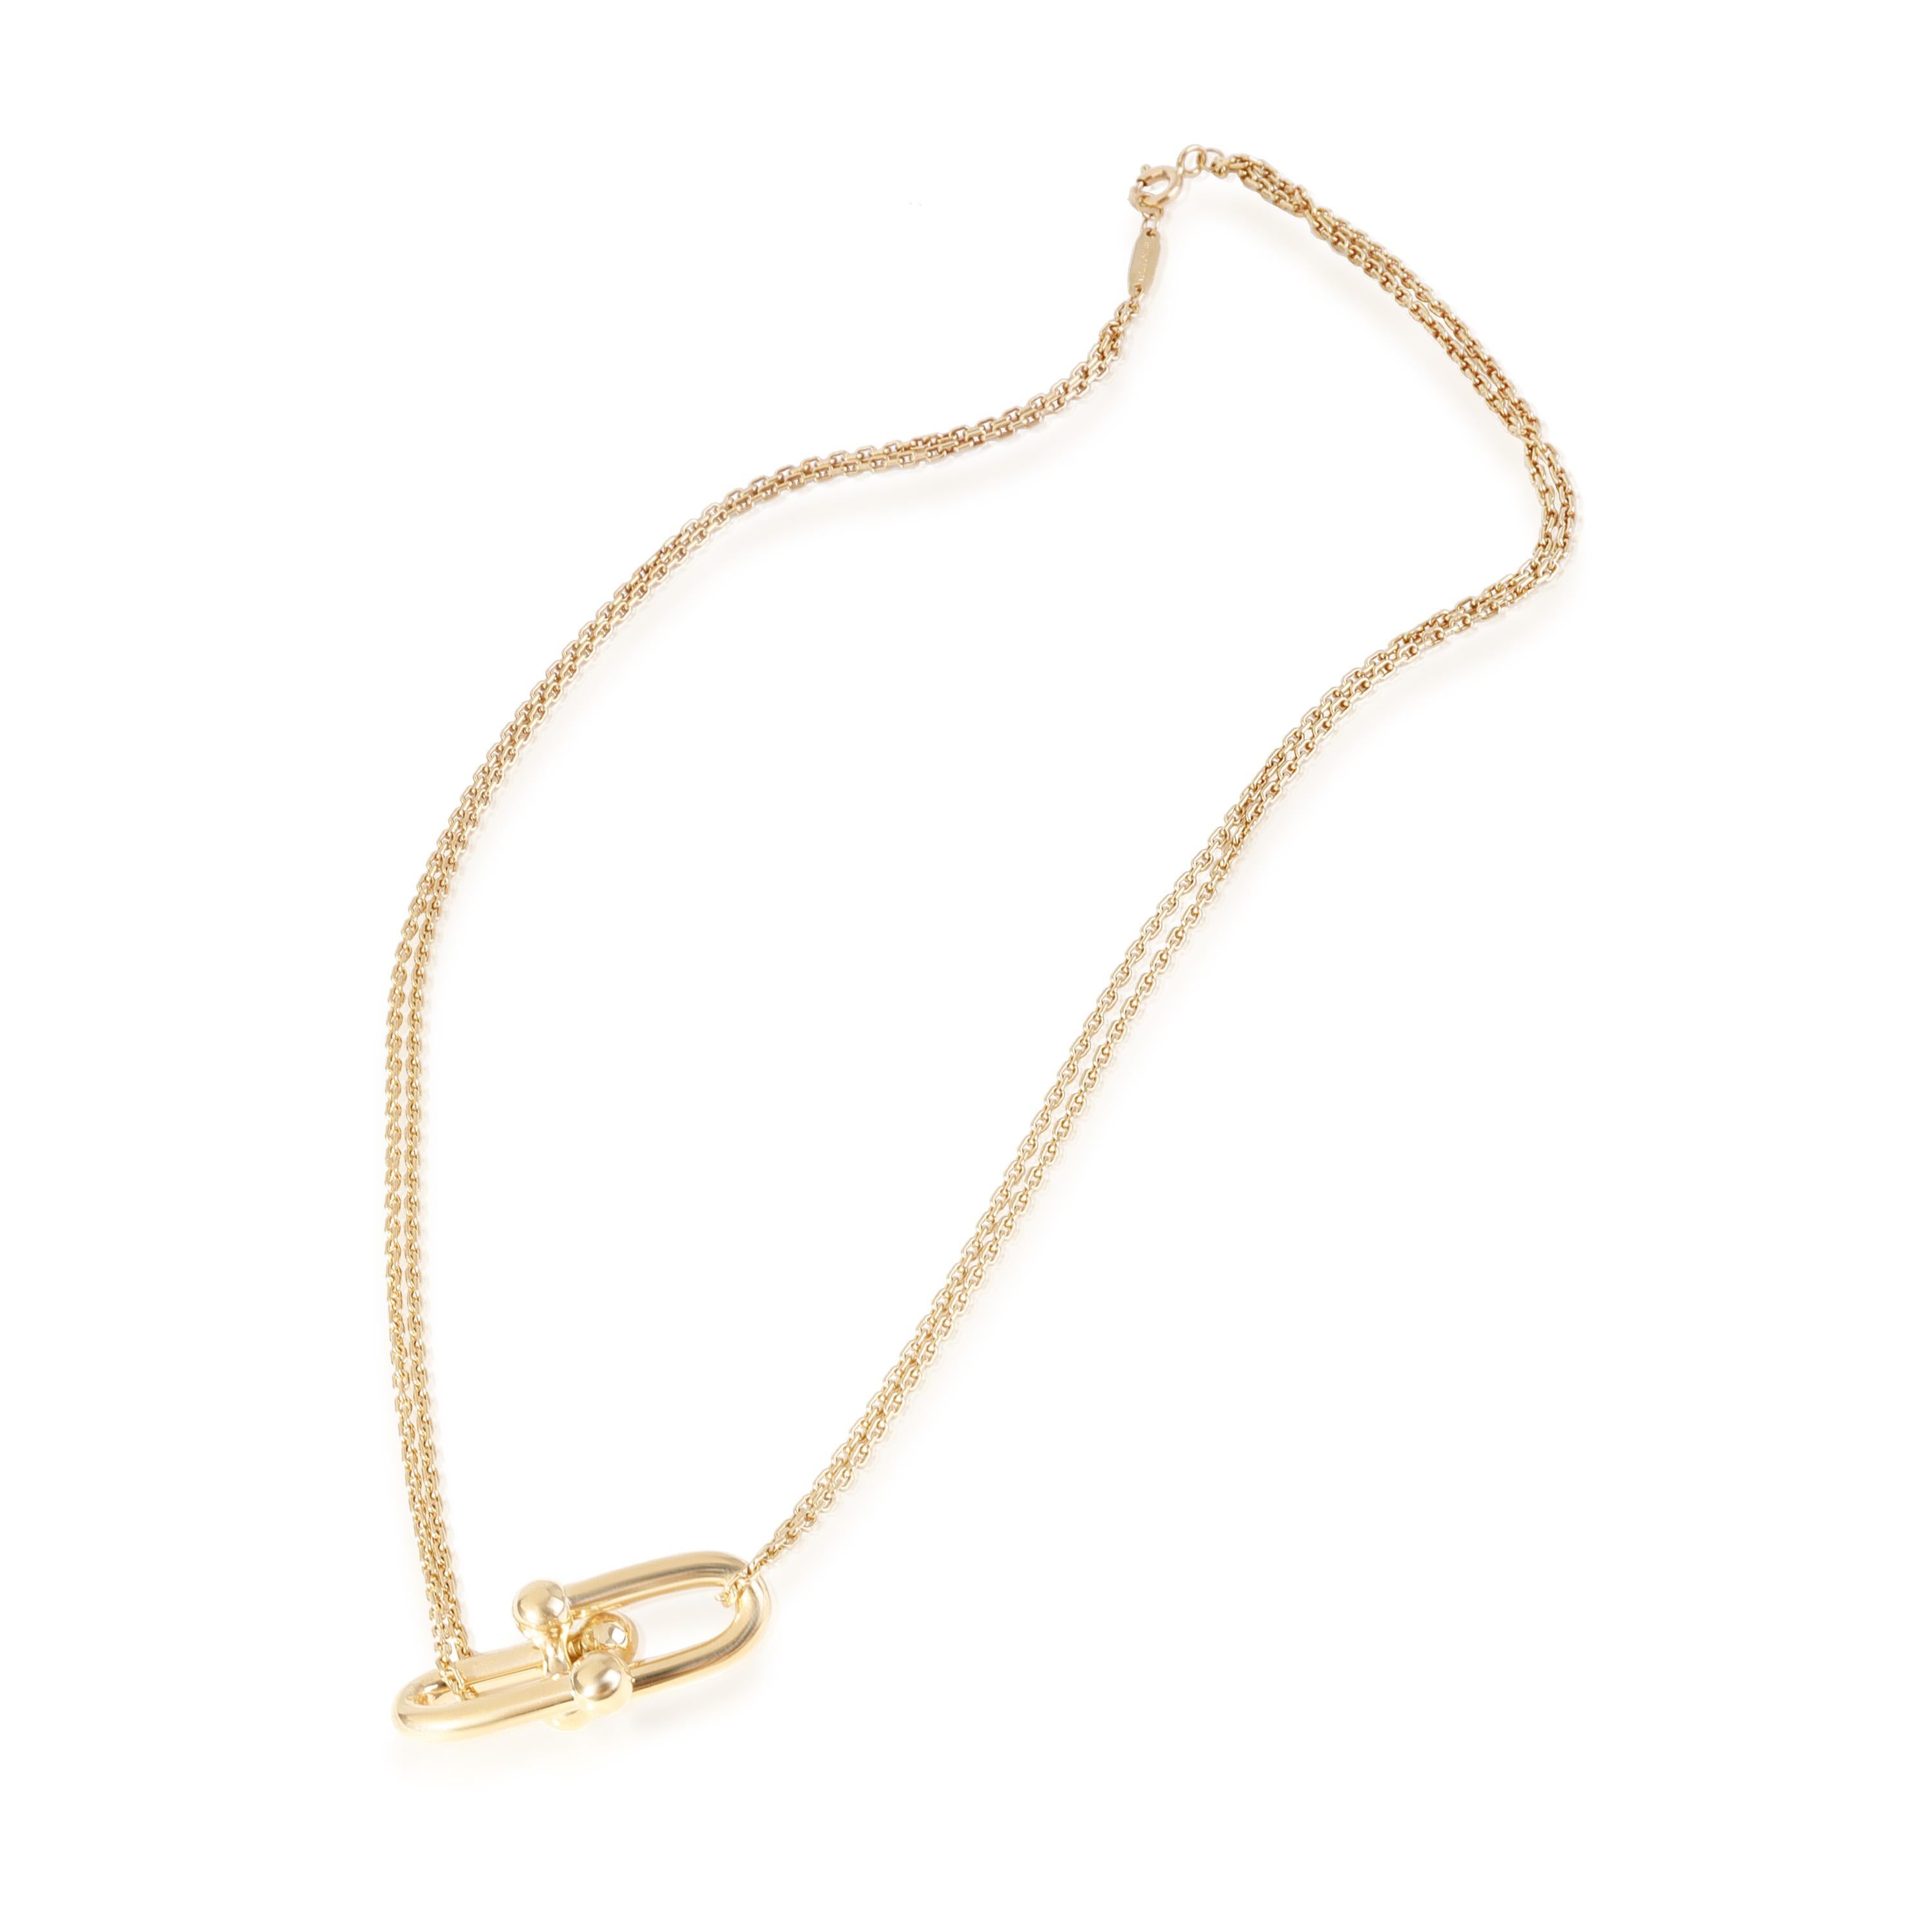 Tiffany & Co. HardWear Necklace in 18K Yellow Gold

PRIMARY DETAILS
SKU: 117462
Listing Title: Tiffany & Co. HardWear Necklace in 18K Yellow Gold
Condition Description: Retails for 3300 USD. In excellent condition and recently polished. Chain is 16